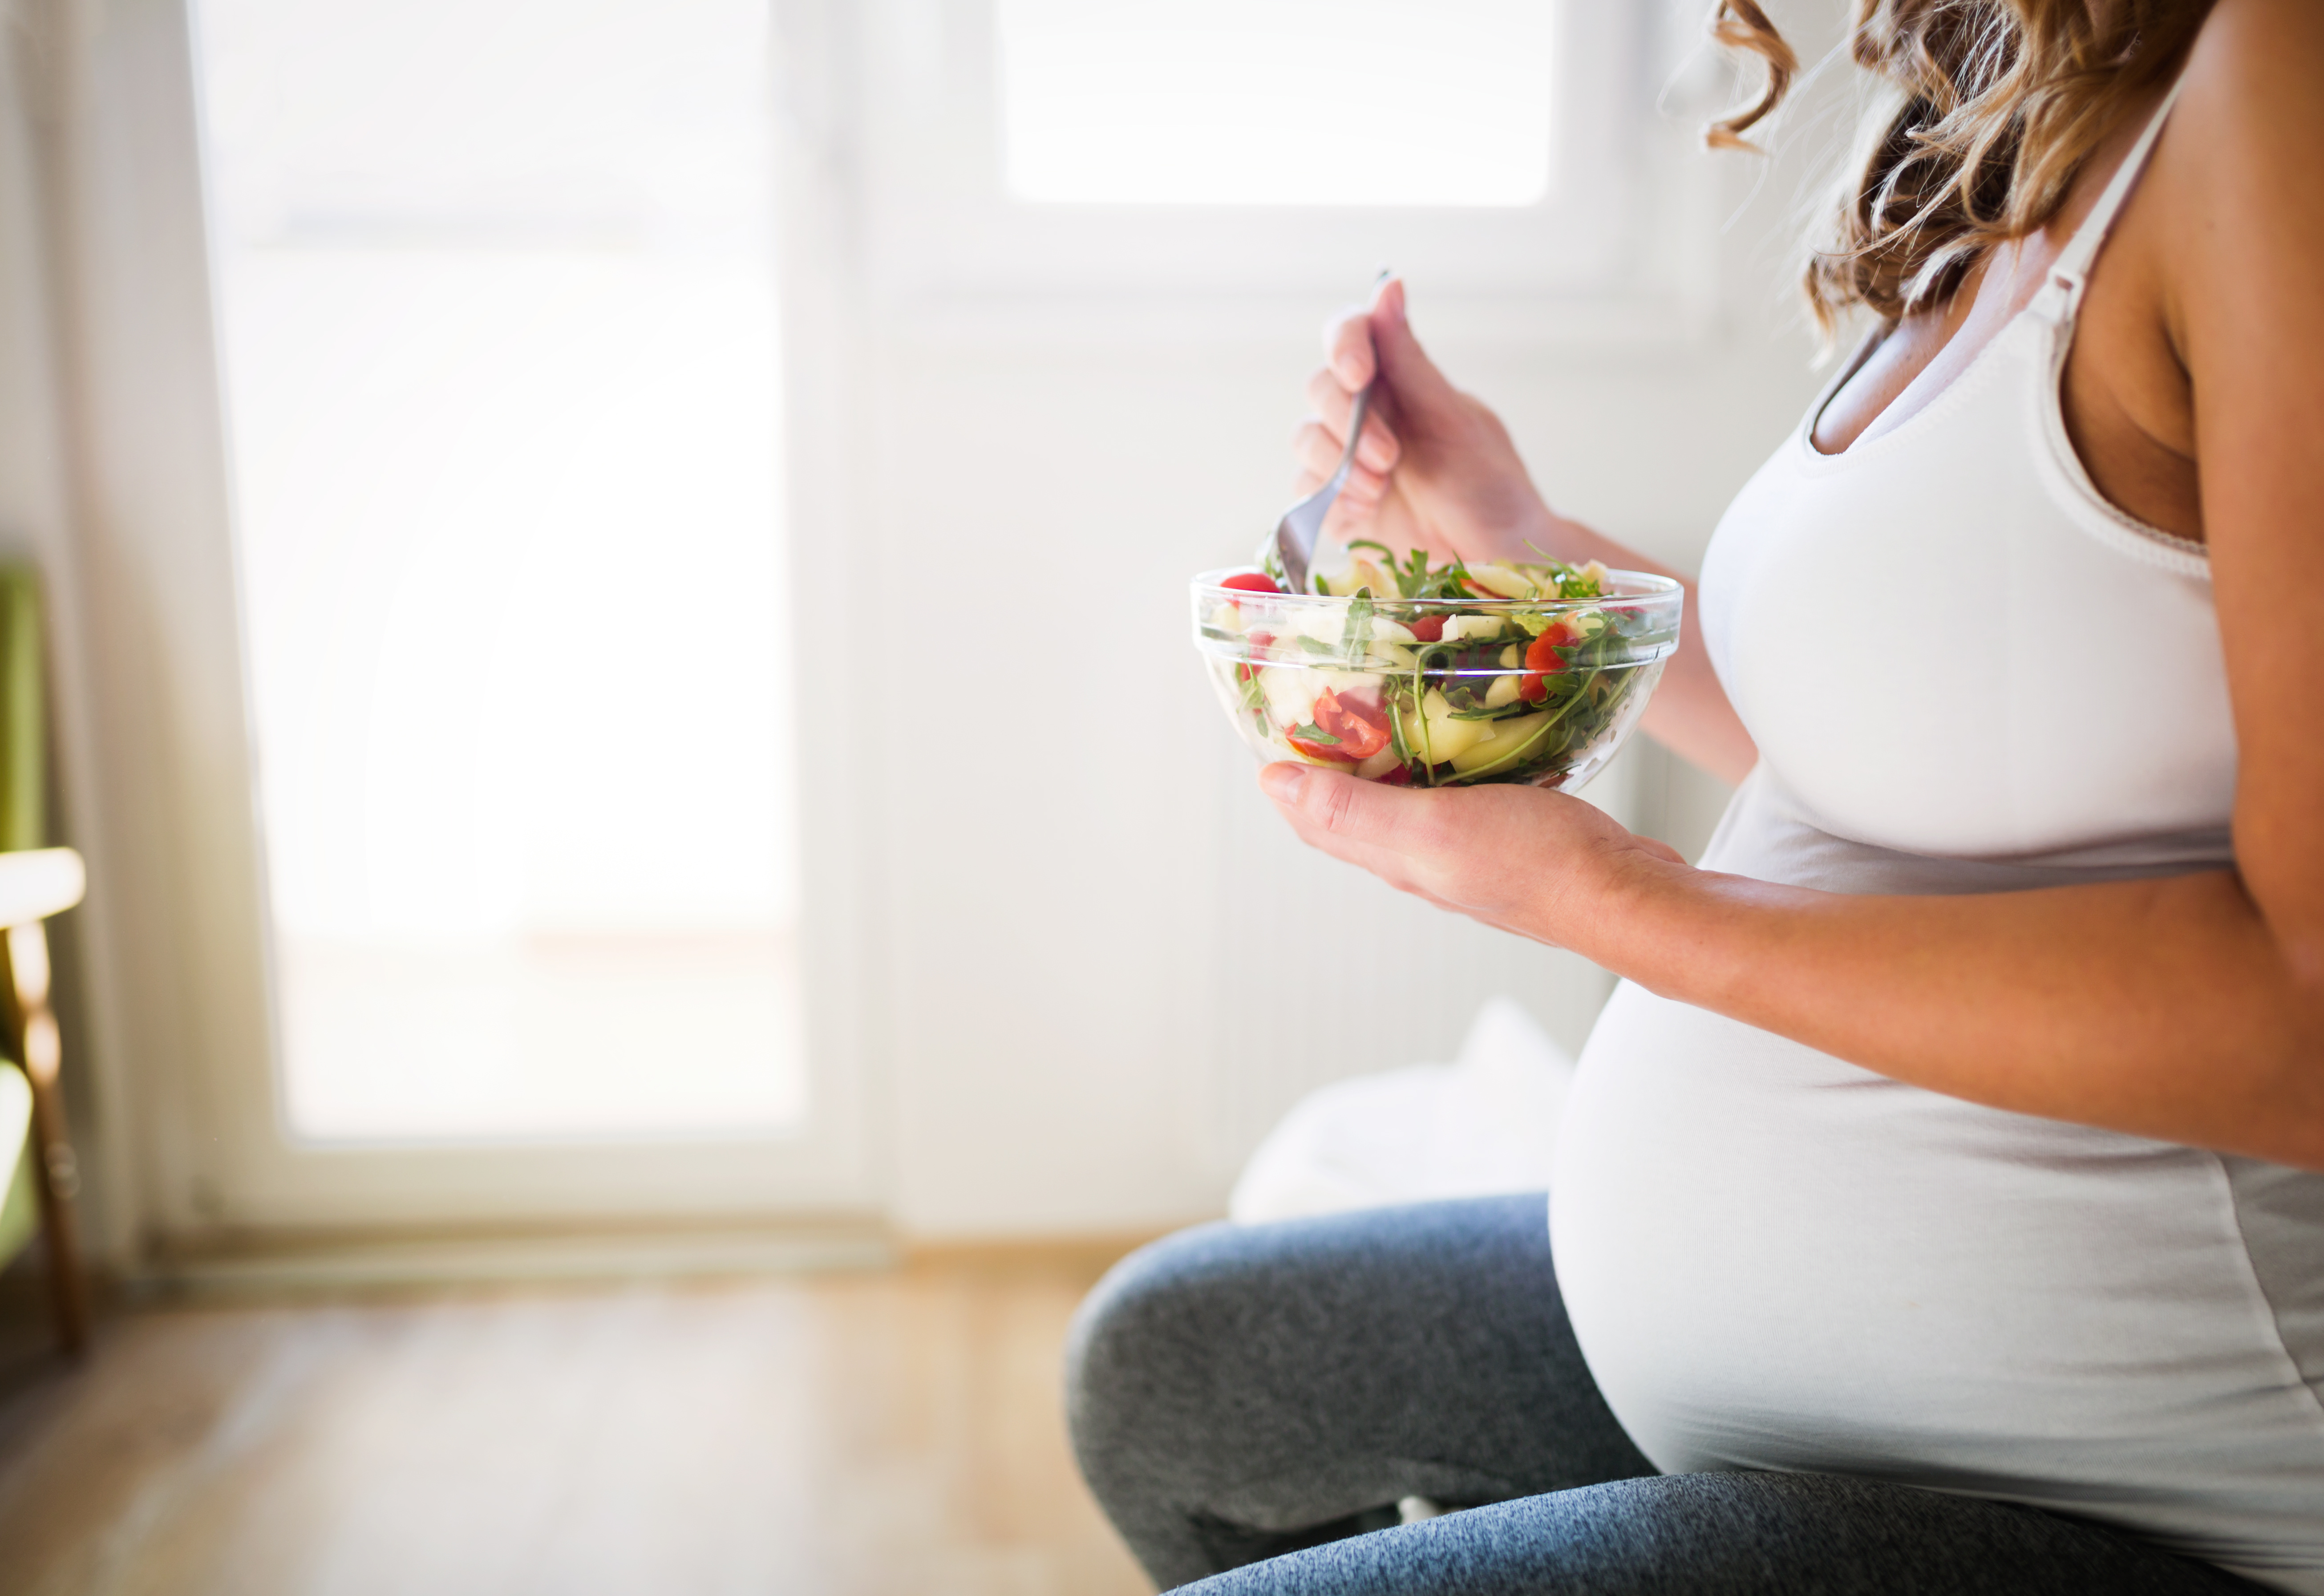 High Glucose During Pregnancy:  How to Manage Gestational Diabetes